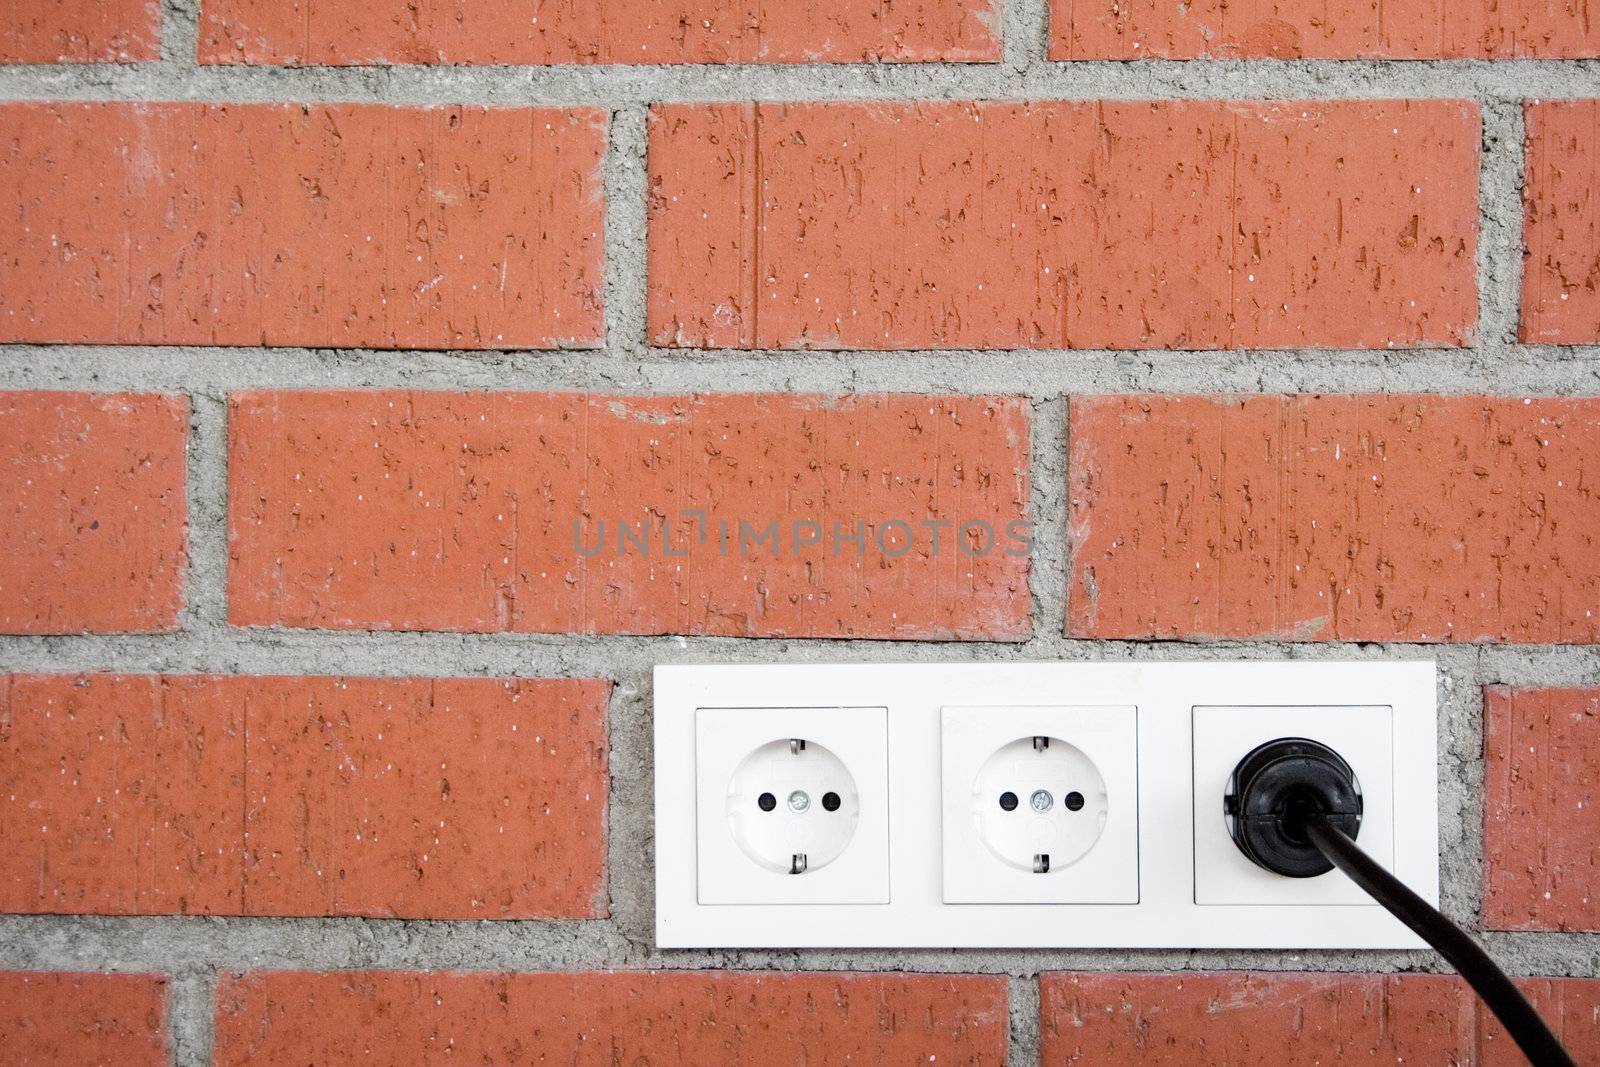 Brick Wall with Power Outlet by winterling